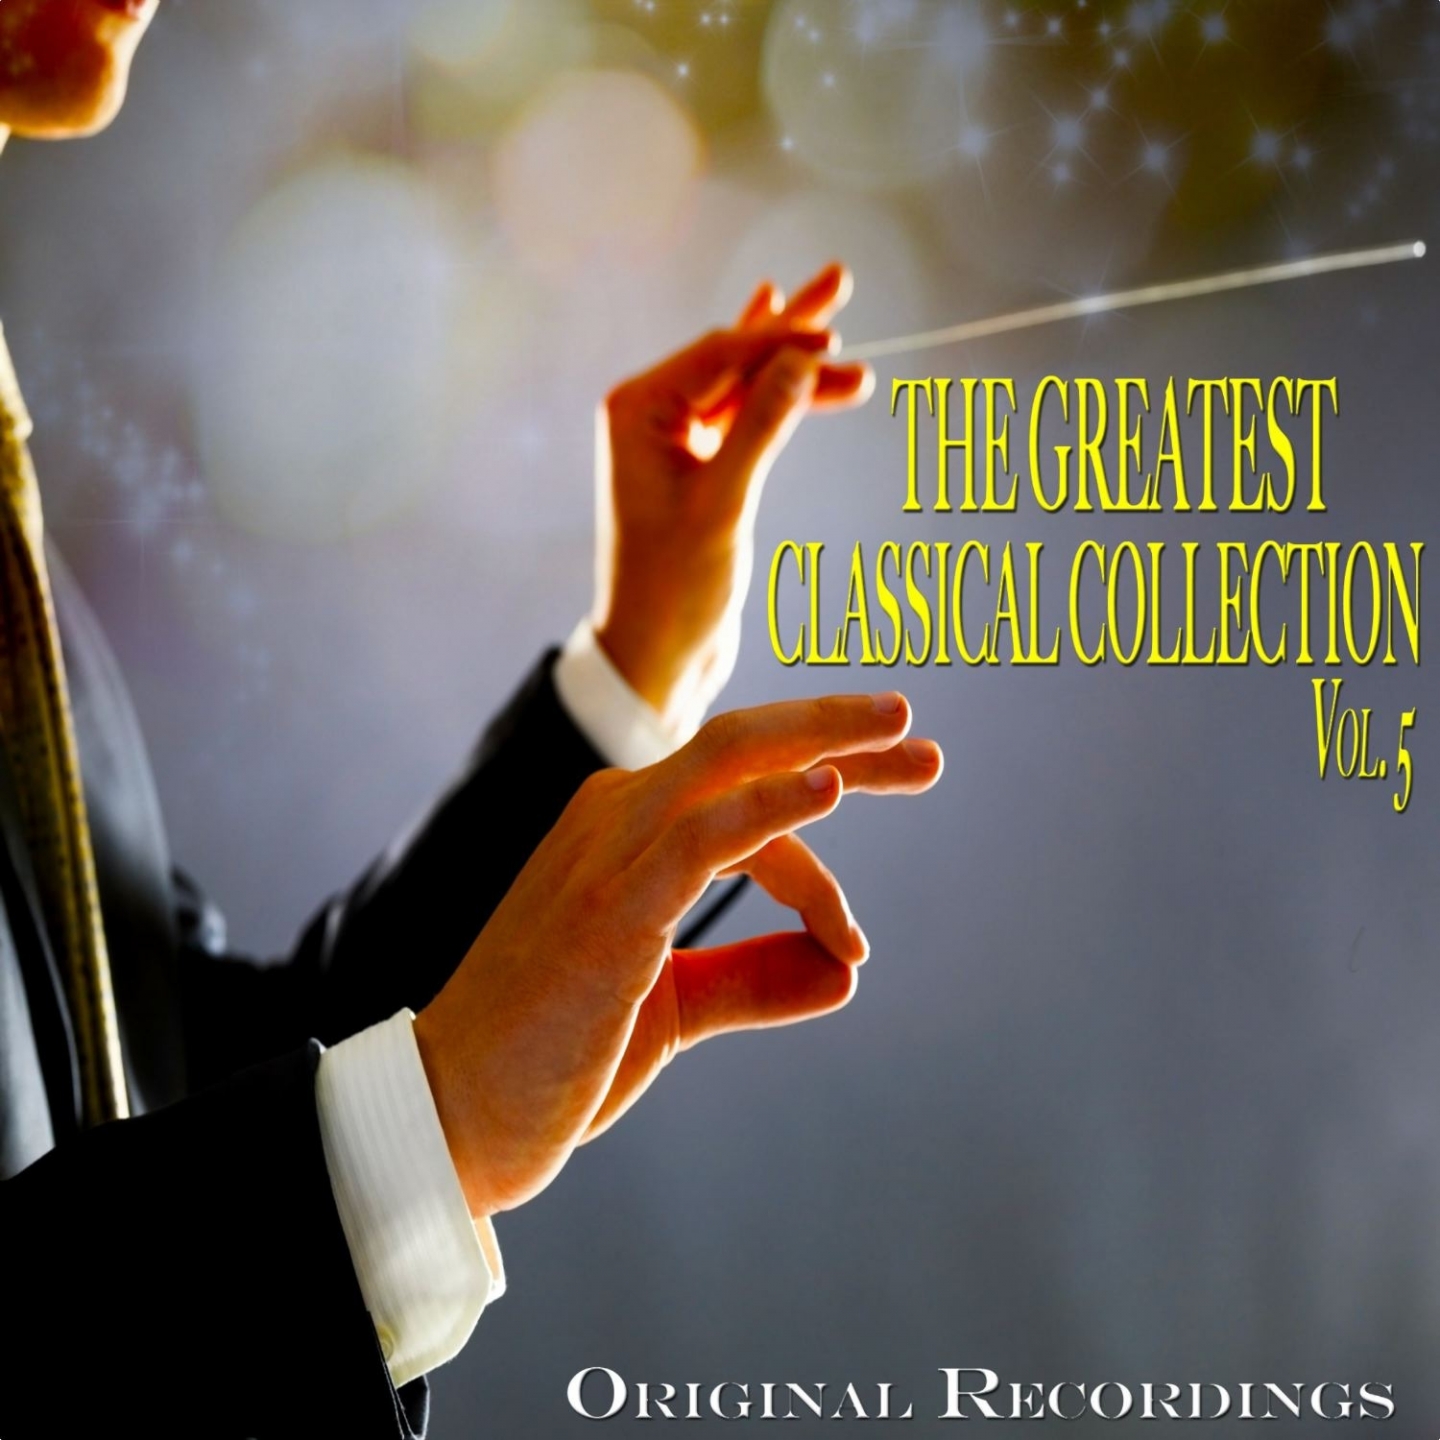 The Greatest Classical Collection Vol. 5 - Original Recordings